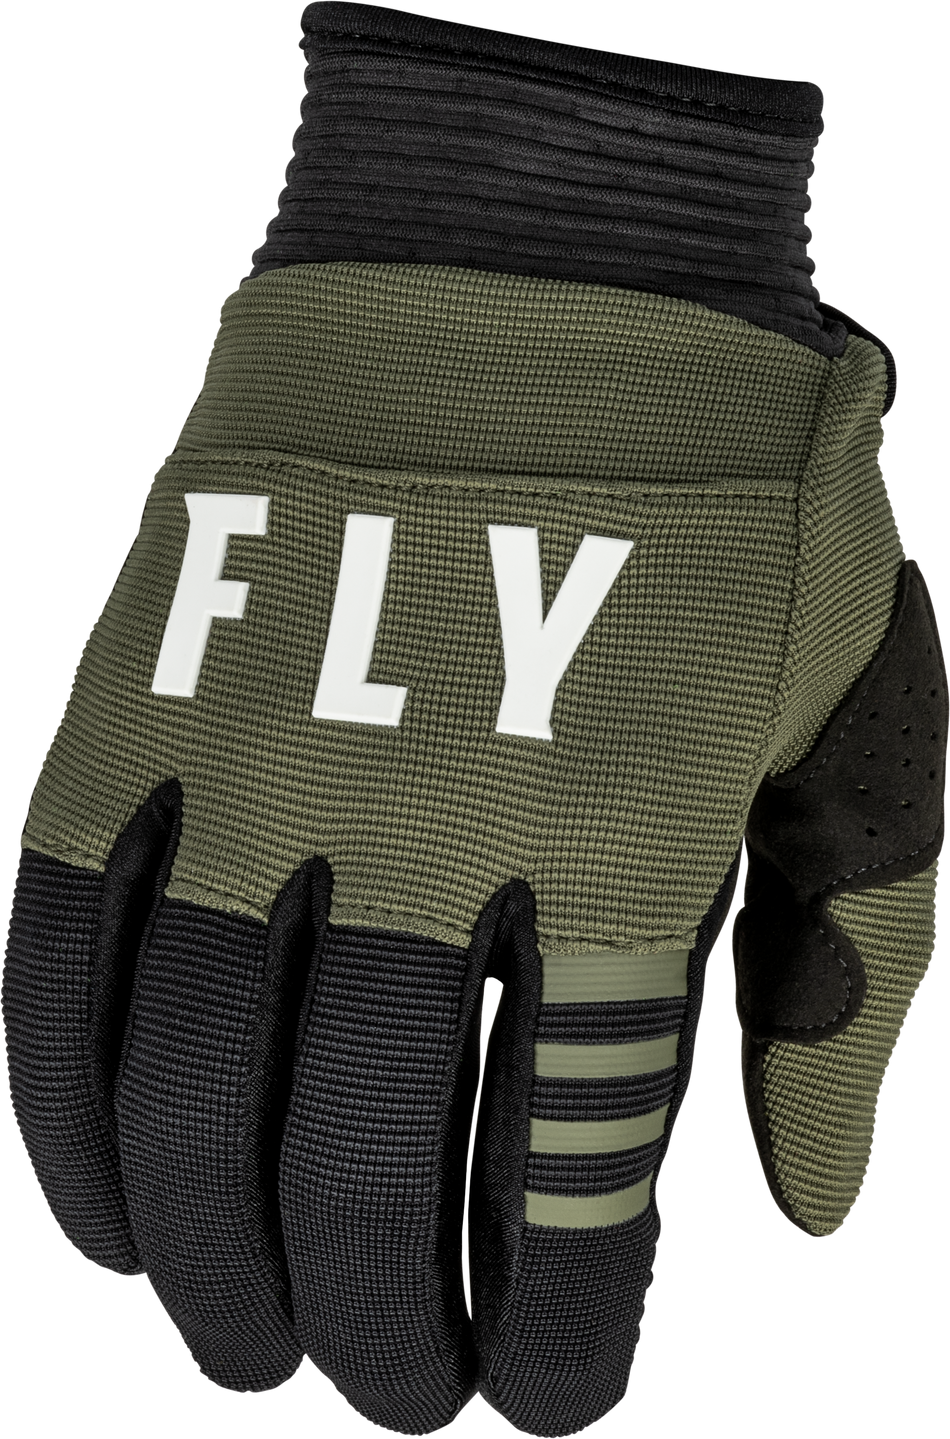 FLY RACING F-16 Gloves Olive Green/Black Sm 376-913S